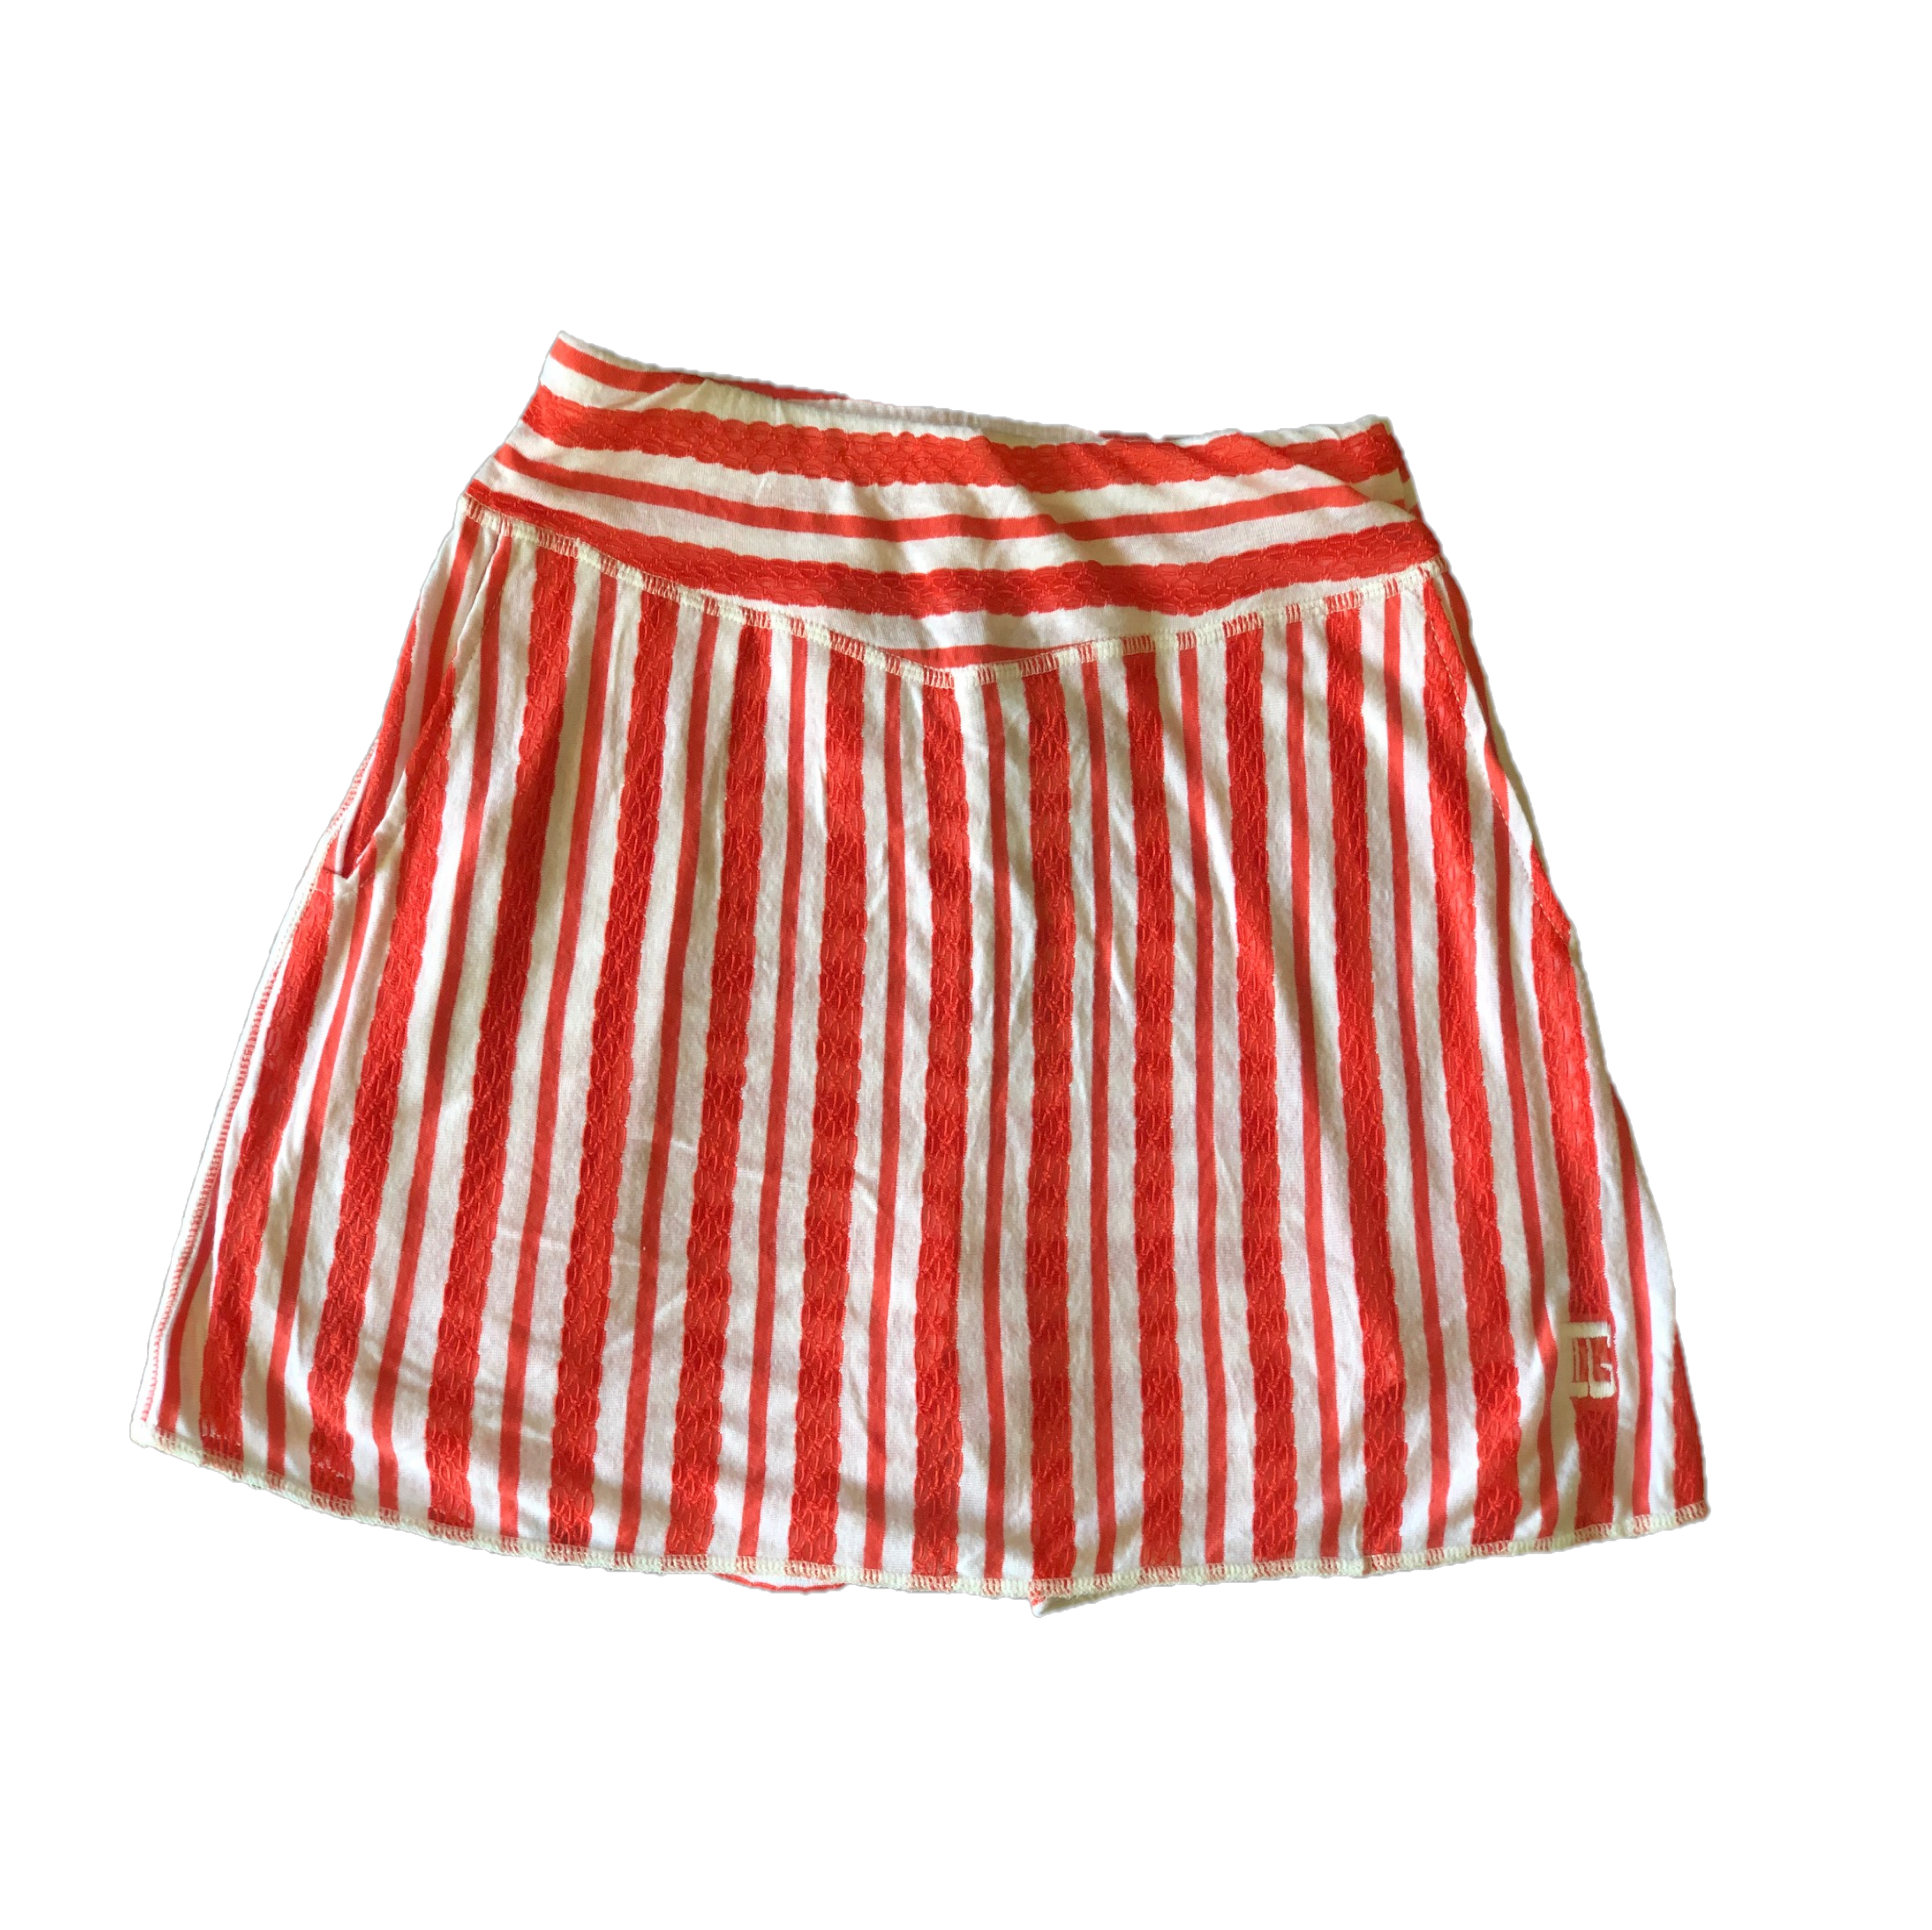 LS – 043G || Ladies Skort White With Orange Lace Combination Stripe 2 Side Pocket And Pleated Rear Panel